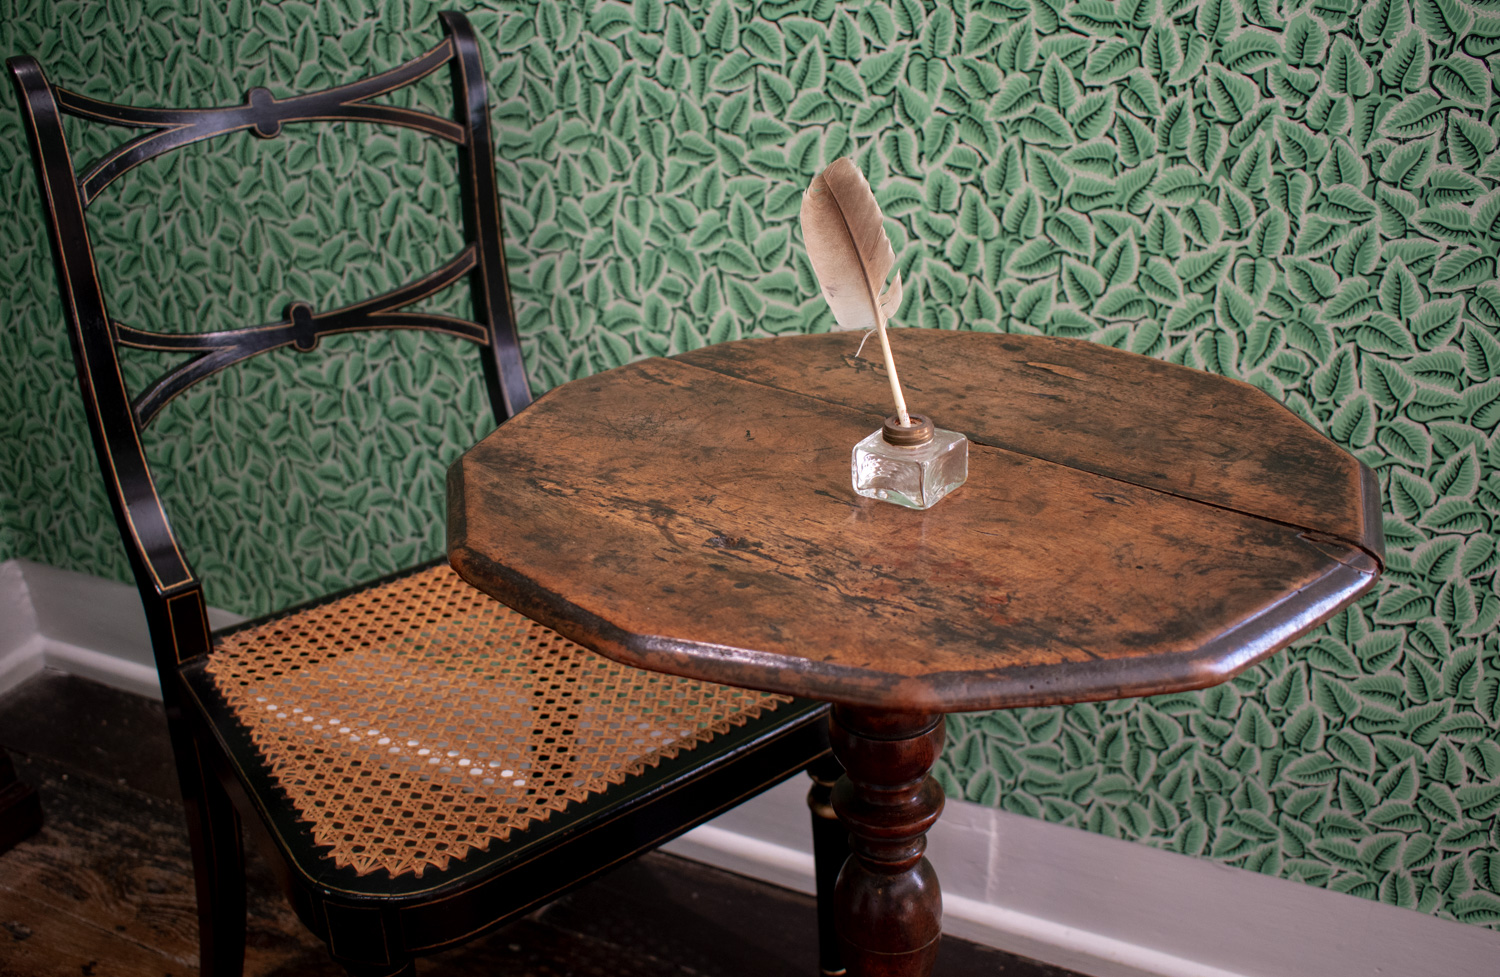 A small multi-sided writing table, belonging to Jane Austen with a quill in a glass ink stand on top. There is a cane seated chair and green wallpaper behind